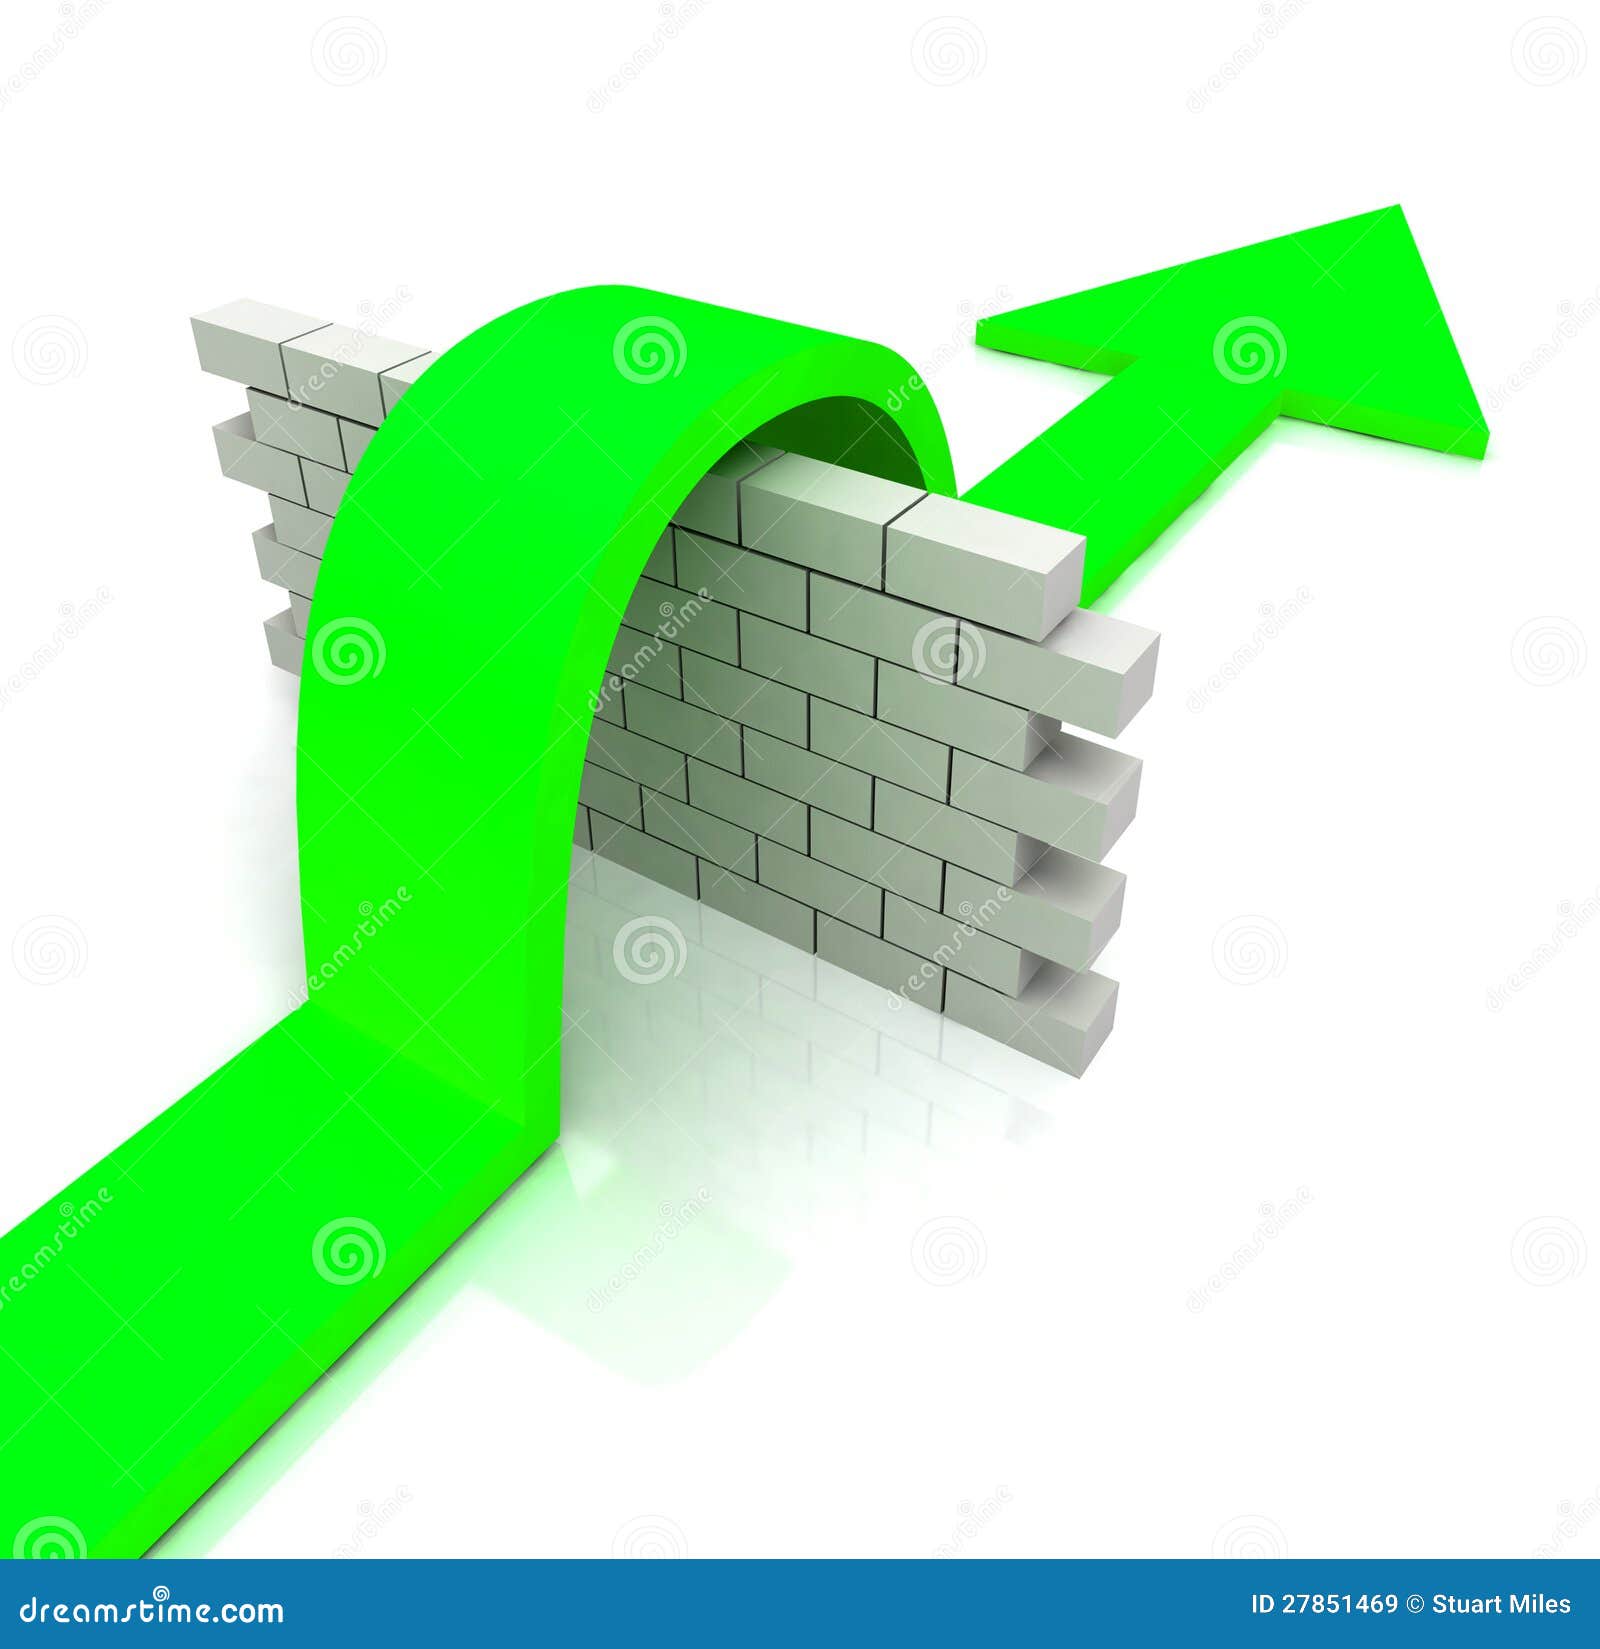 green arrow over wall means overcome obstacles